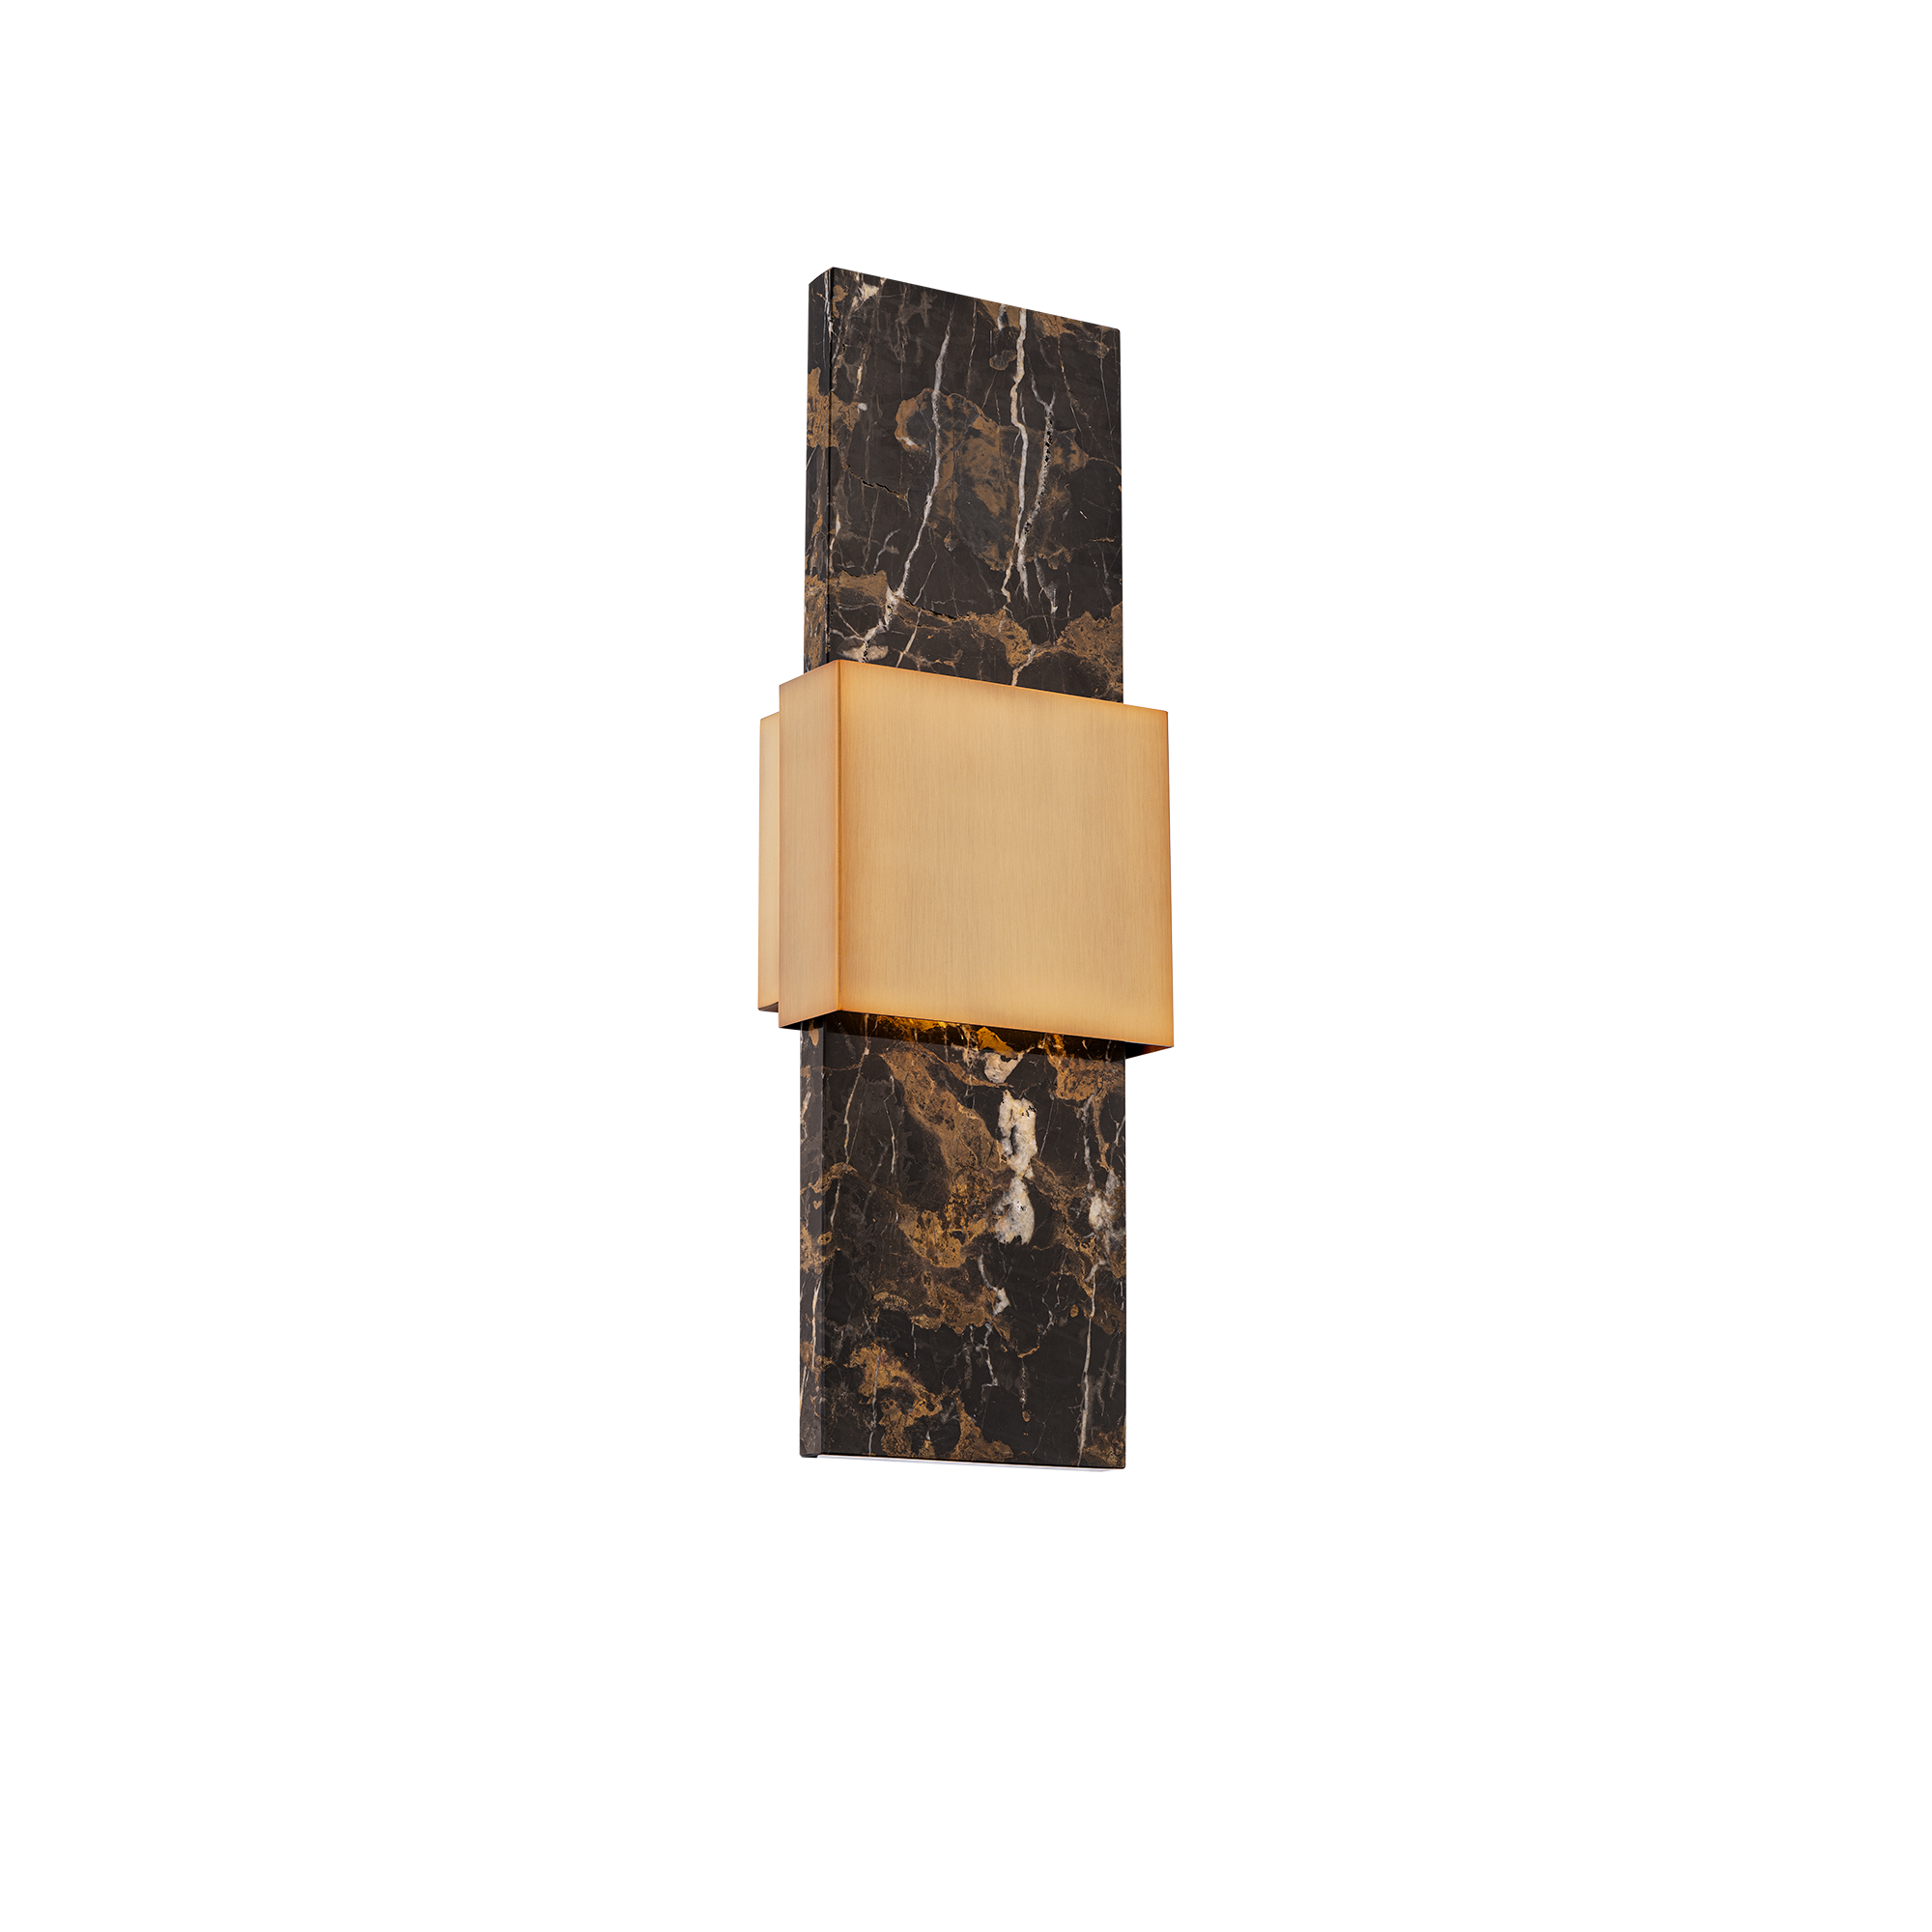 ZURICH Wall sconce Black, Gold INTEGRATED LED - WS-50324-BK/AB | MODERN FORMS